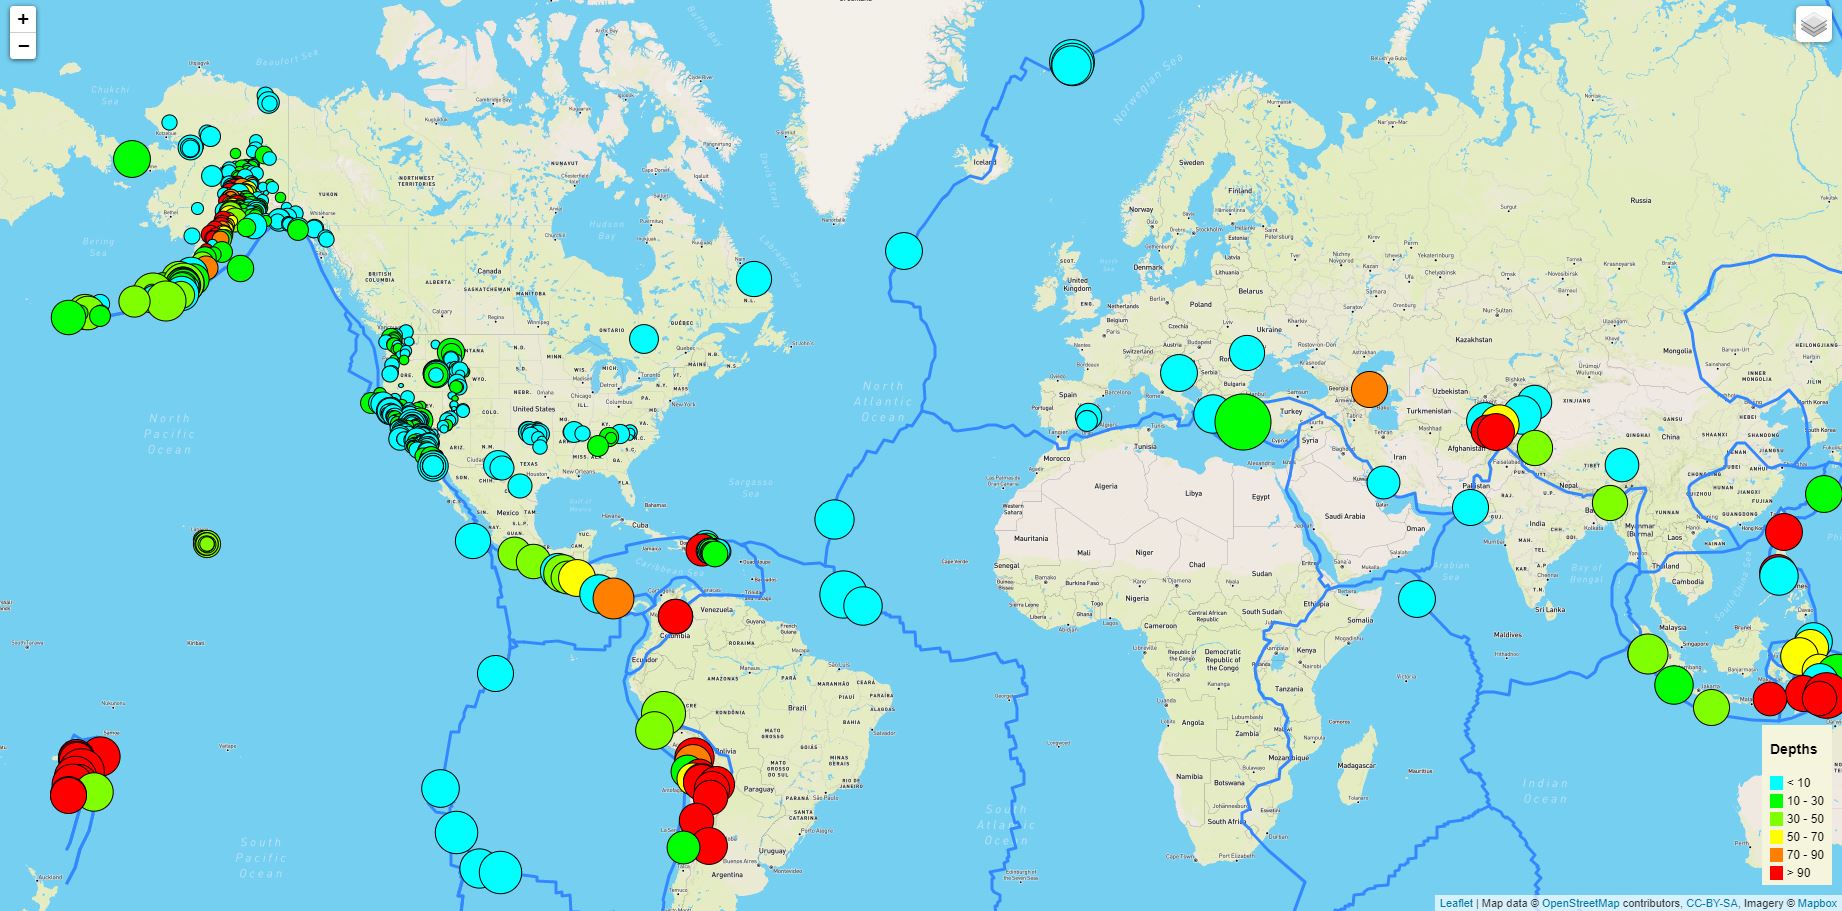 USGS Past Week Earthquakes